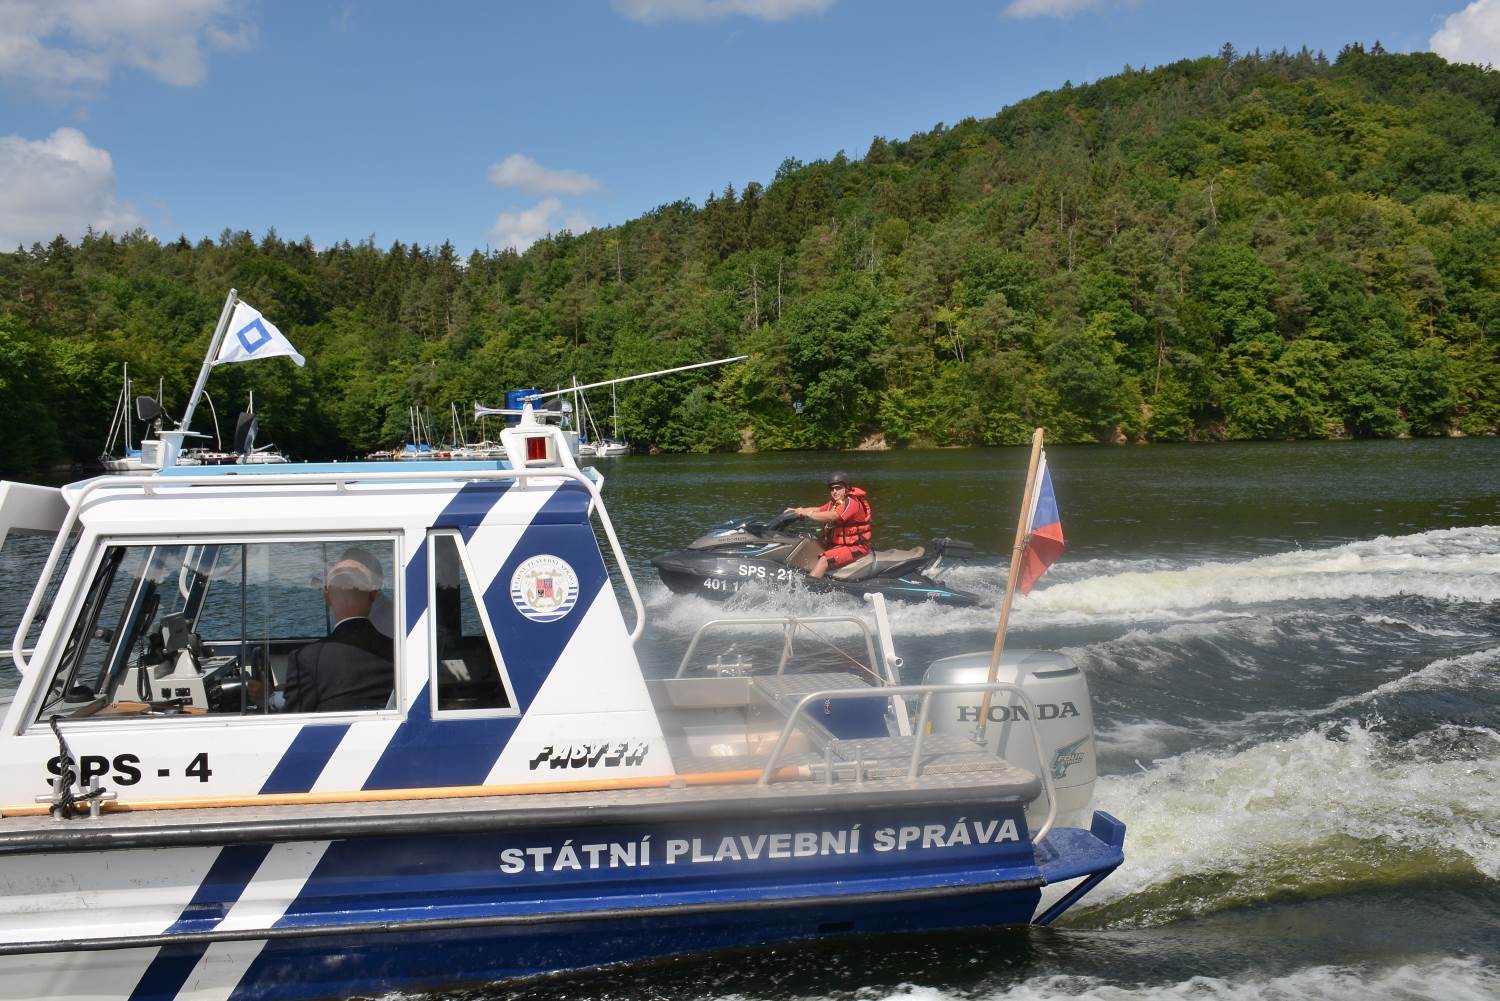 Limited navigational sections at Slapy during summer holidays